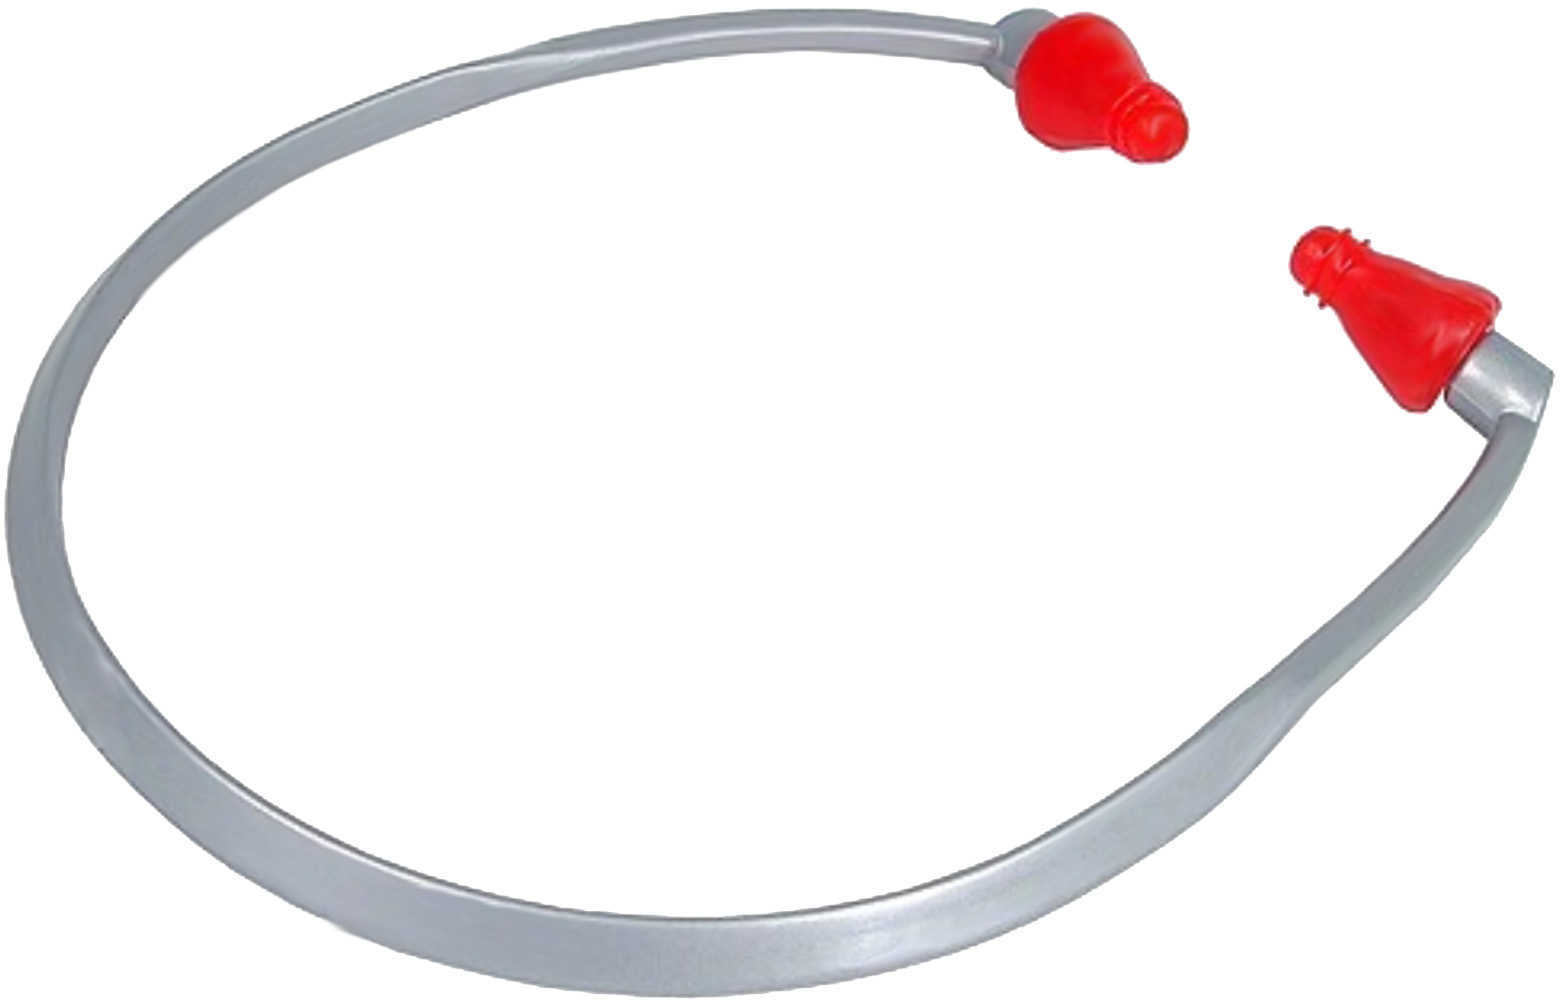 Radians Rb1150 Rad-Band 23 Db Behind The Neck Gray Band With Red Jelli Tips Adult